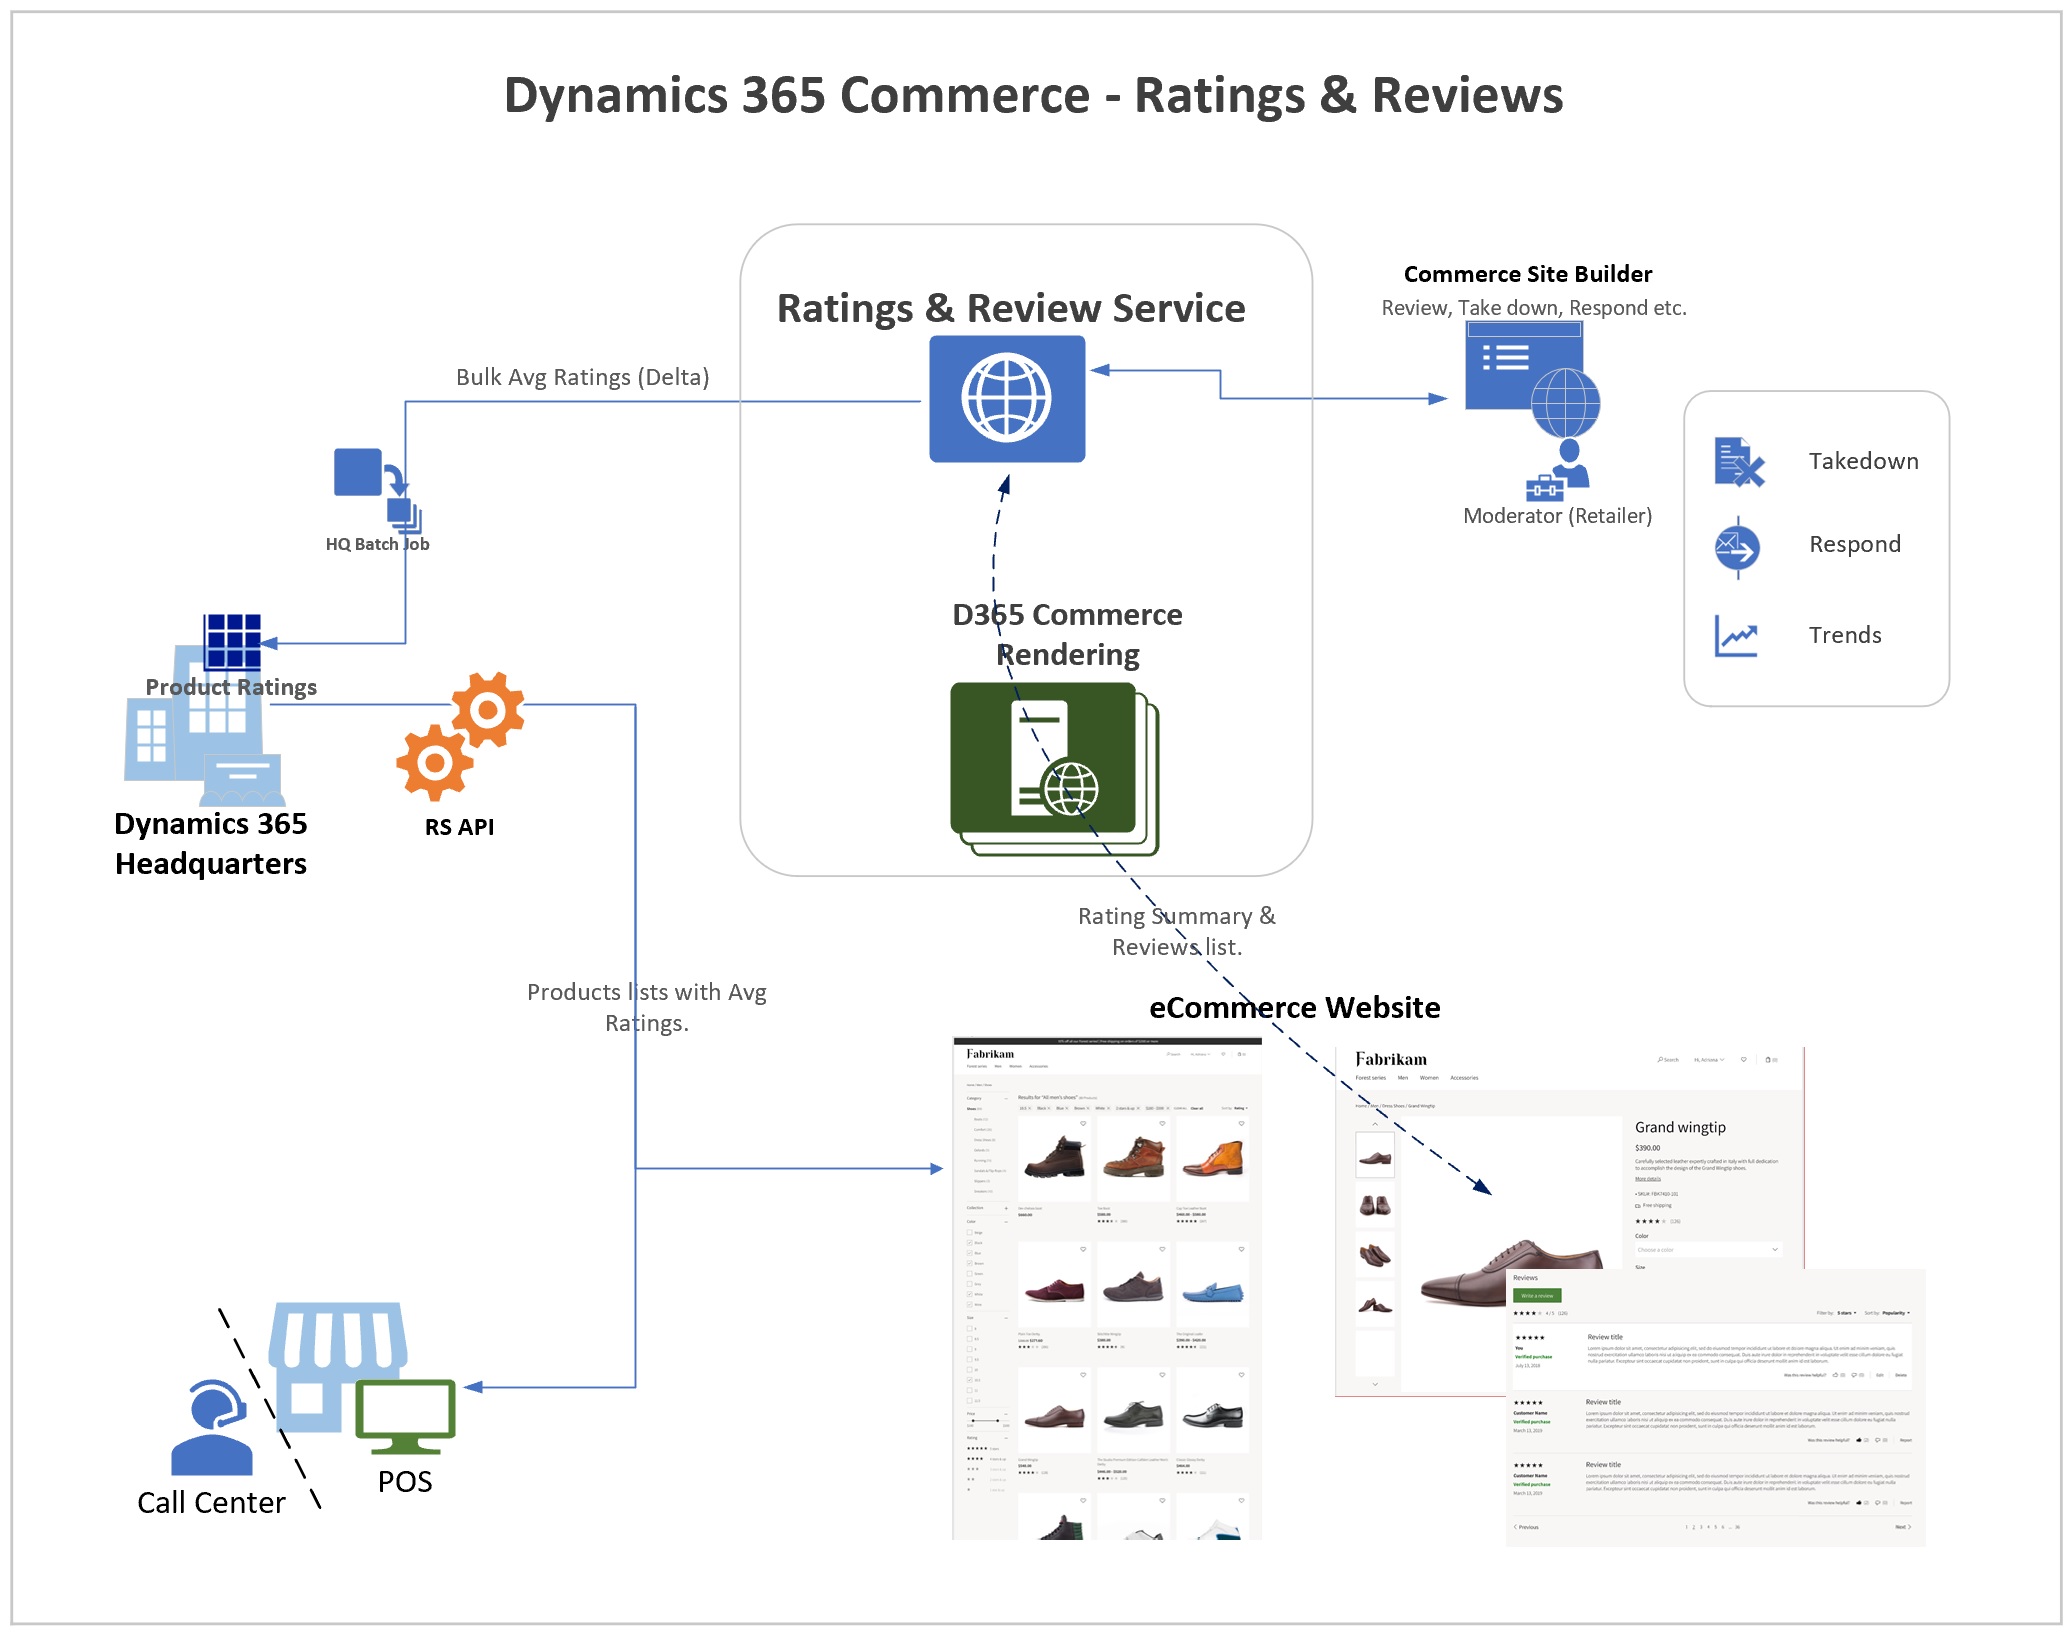 Ratings and reviews in Dynamics 365 for Commerce.